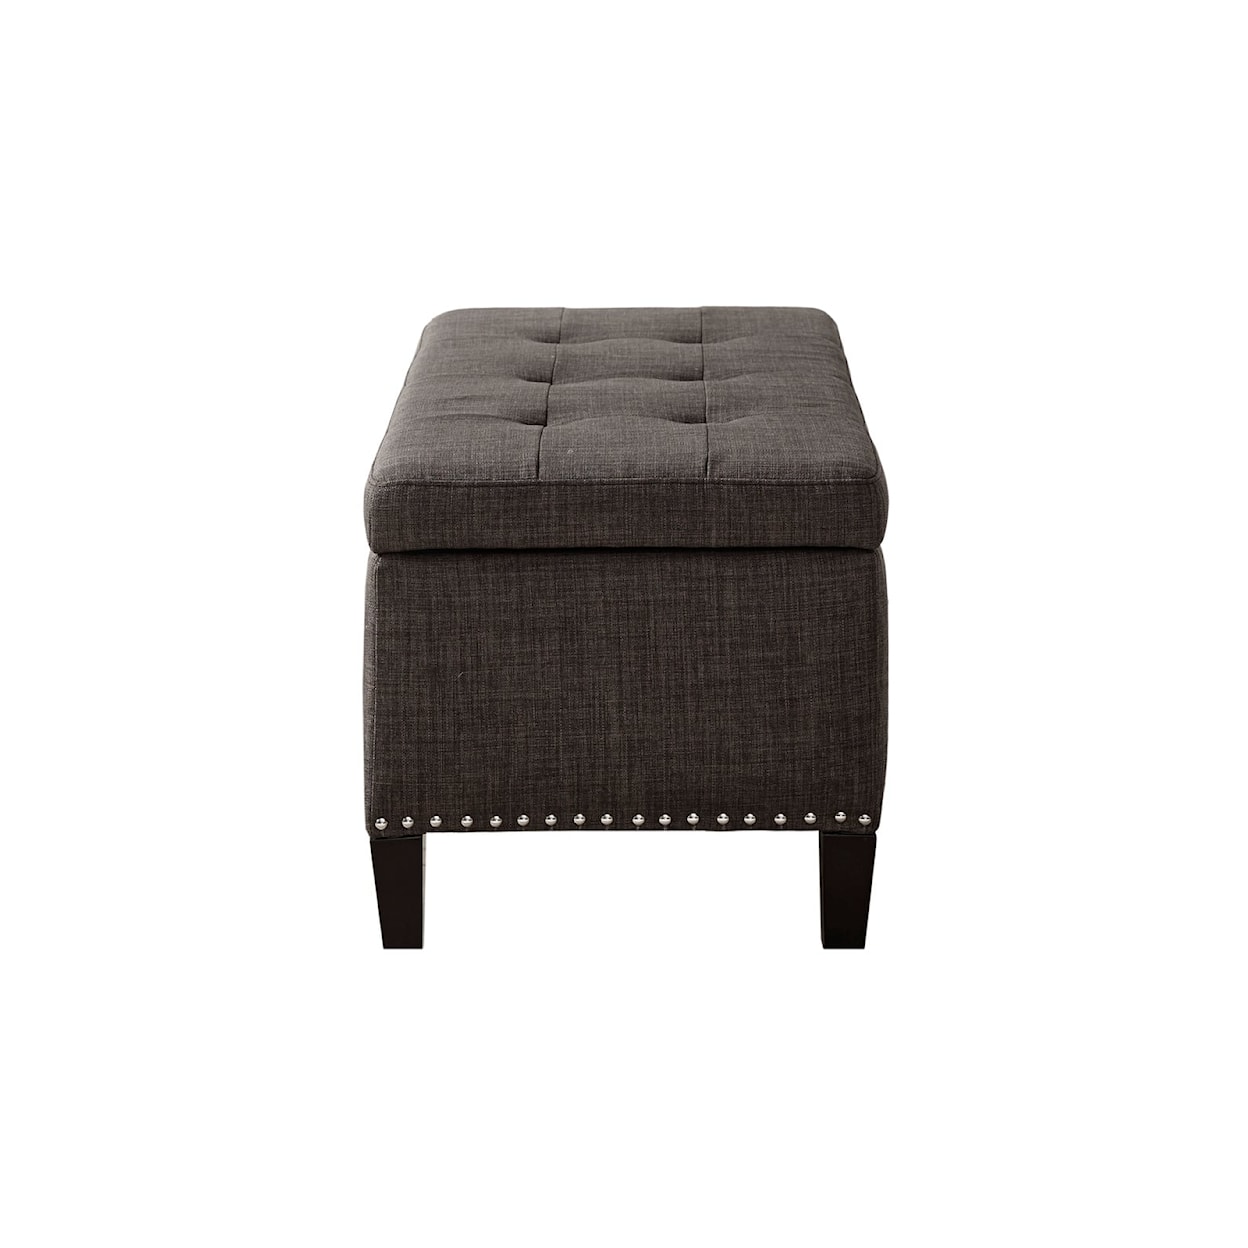 JLA Home Home Accents Tufted Storage Bench